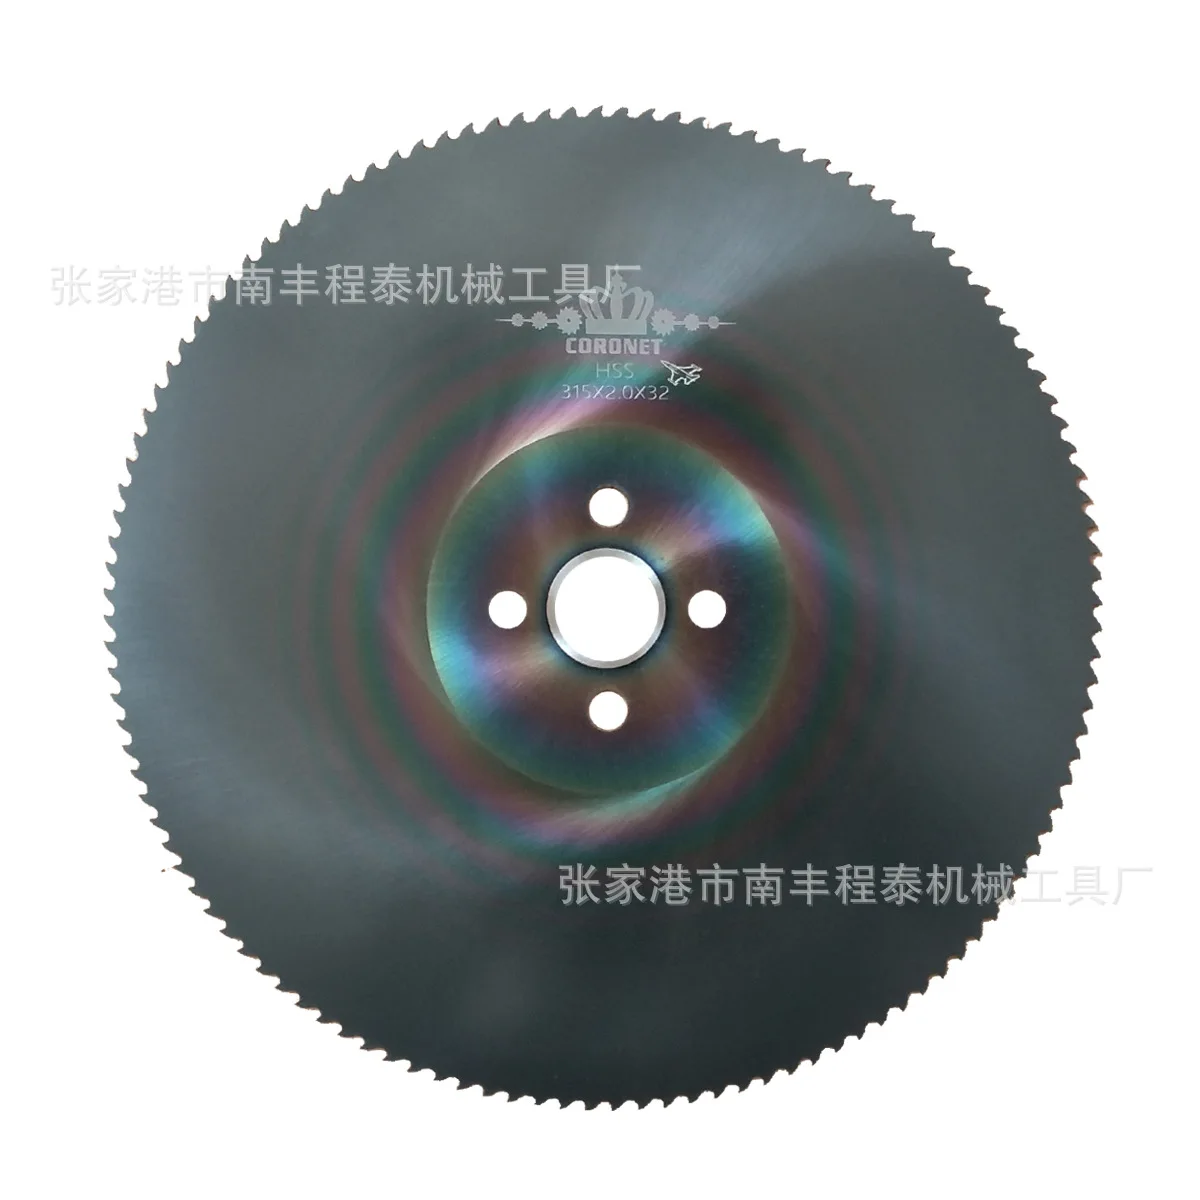 Supply fighter series CORONET crown circular saw blade cutting stainless steel pipe high-speed steel super A LEOPARD